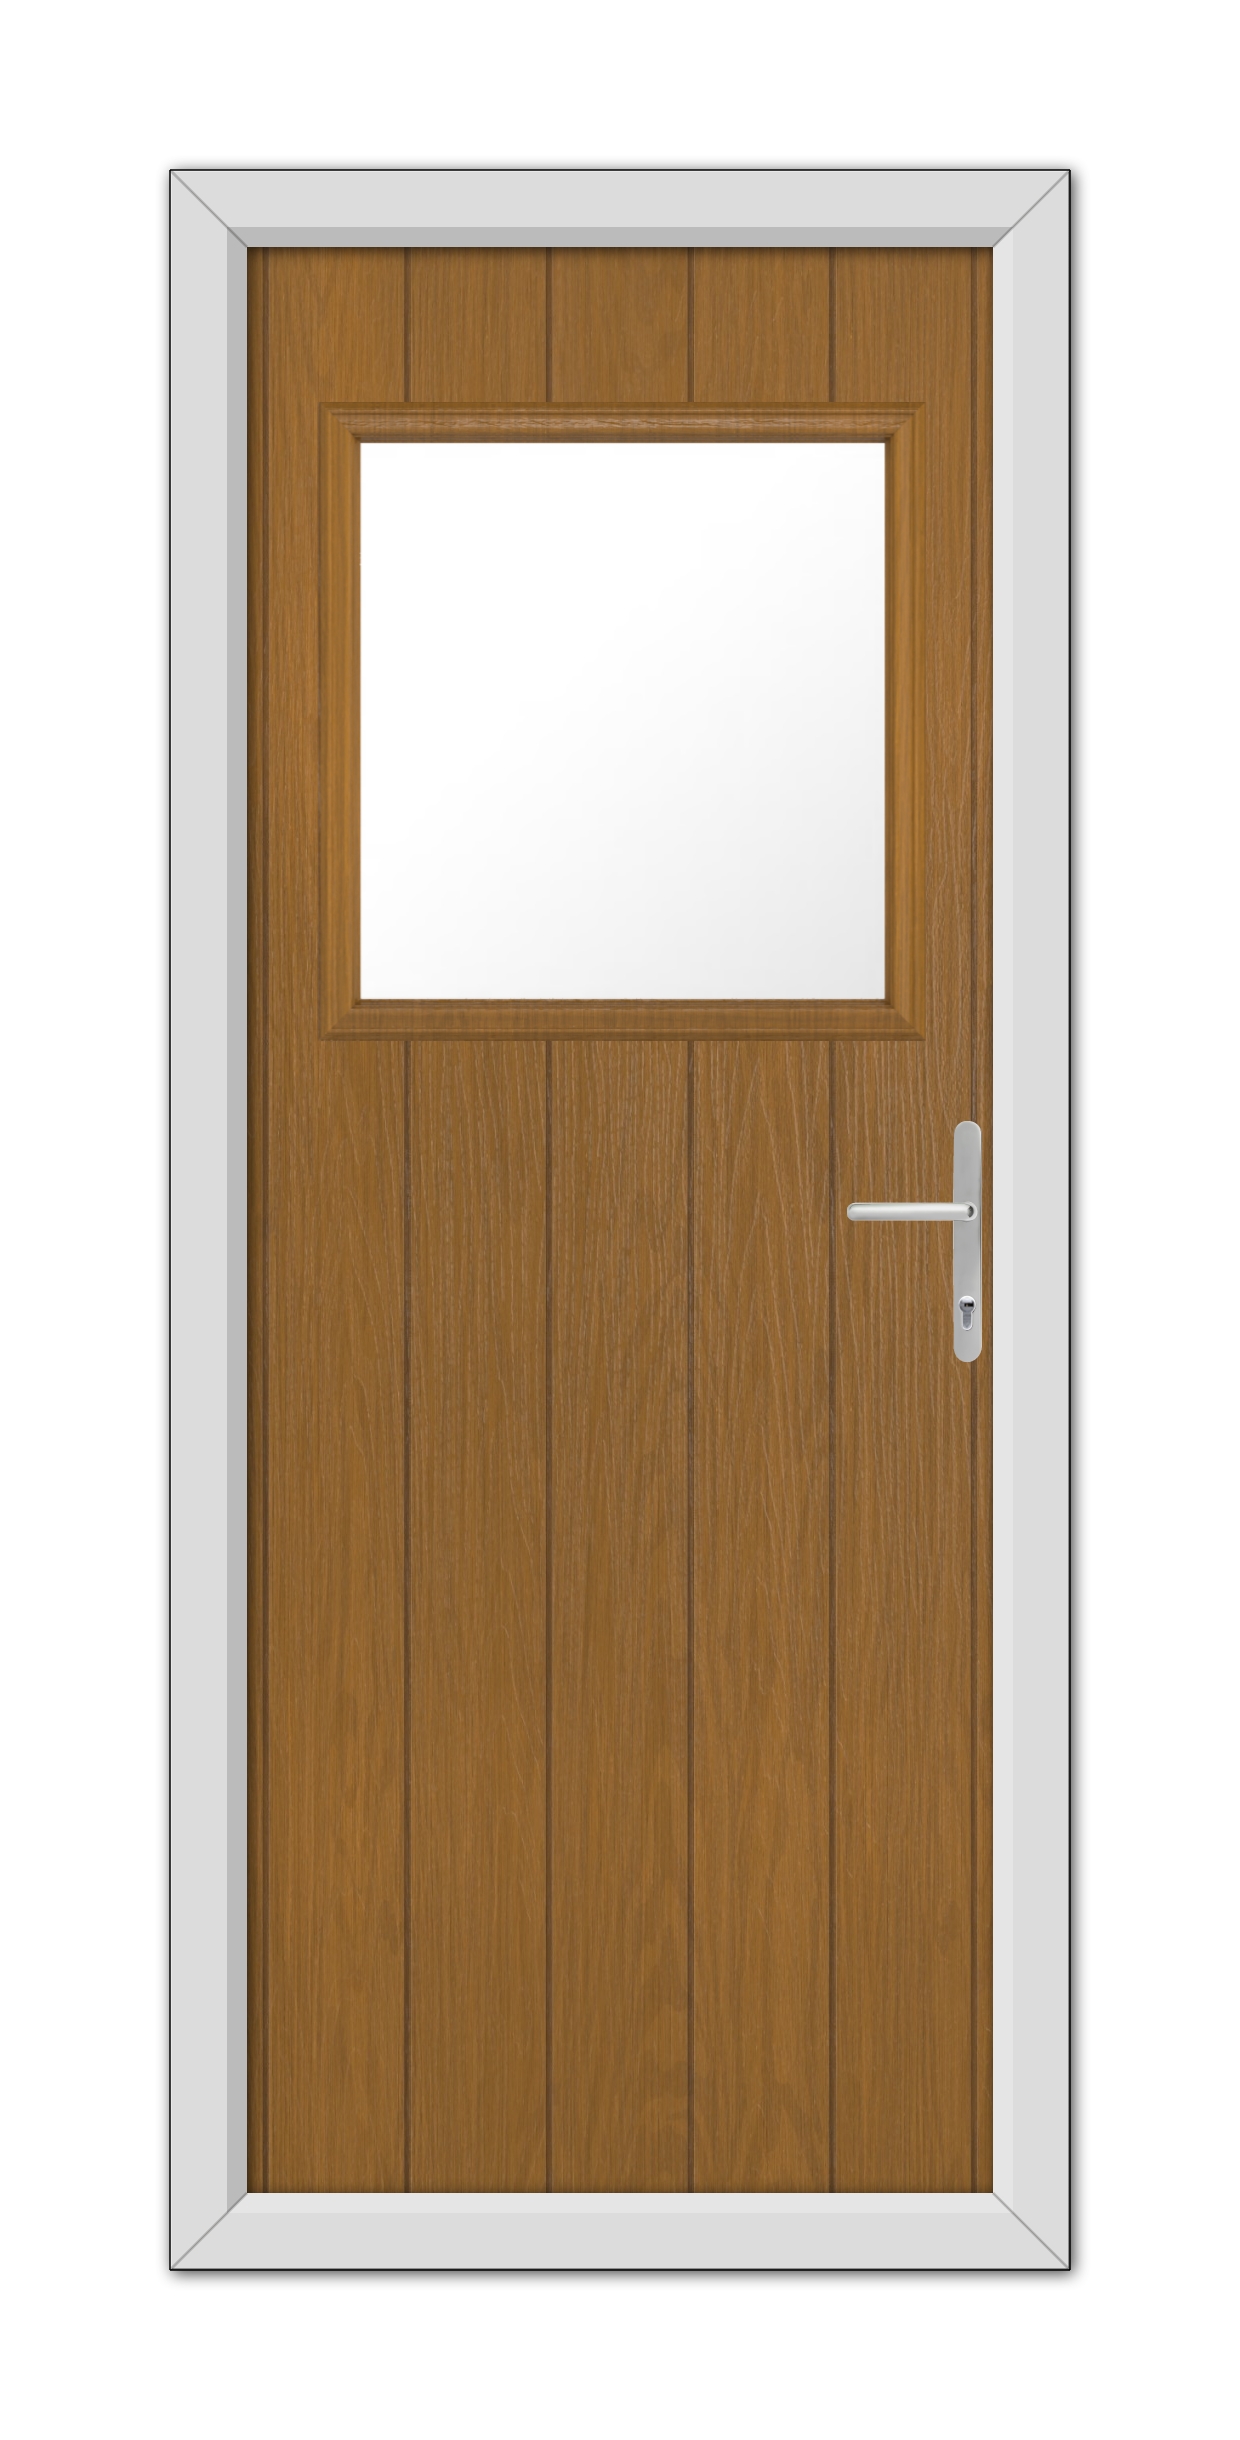 A Oak Fife Composite Door 48mm Timber Core with a rectangular window and a modern handle, set within a white frame.